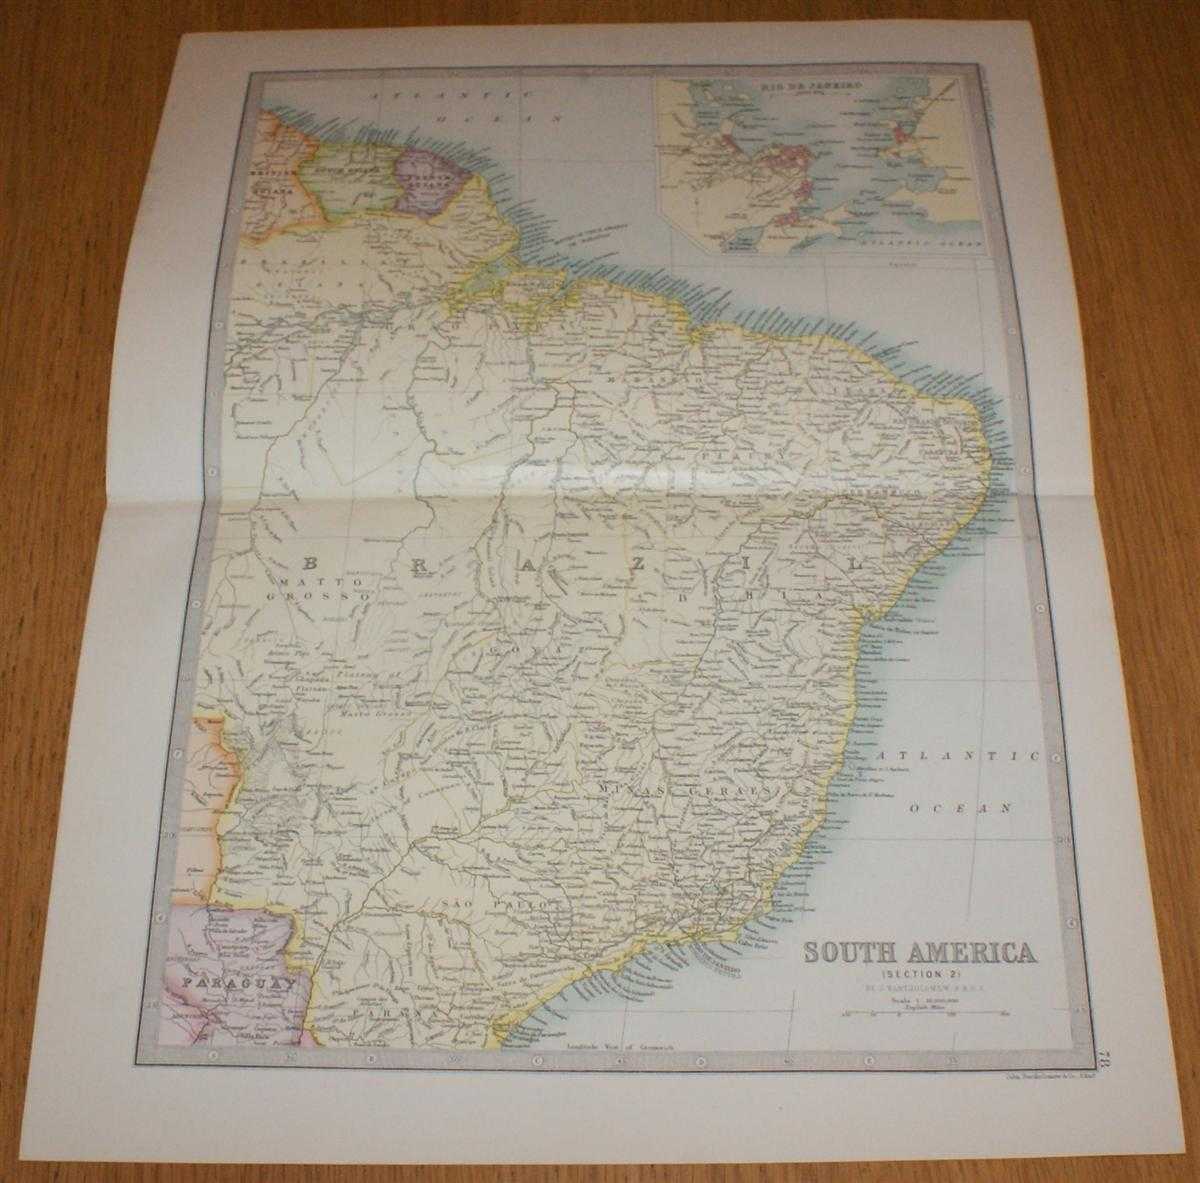 John Bartholomew - Map of South America (Section 2) covering large parts of Brazil, Dutch Guiana and French Guiana including small inset plan of Rio de Janeiro - Sheet 78 Disbound from the 1890 'The Library Reference Atlas of the World'